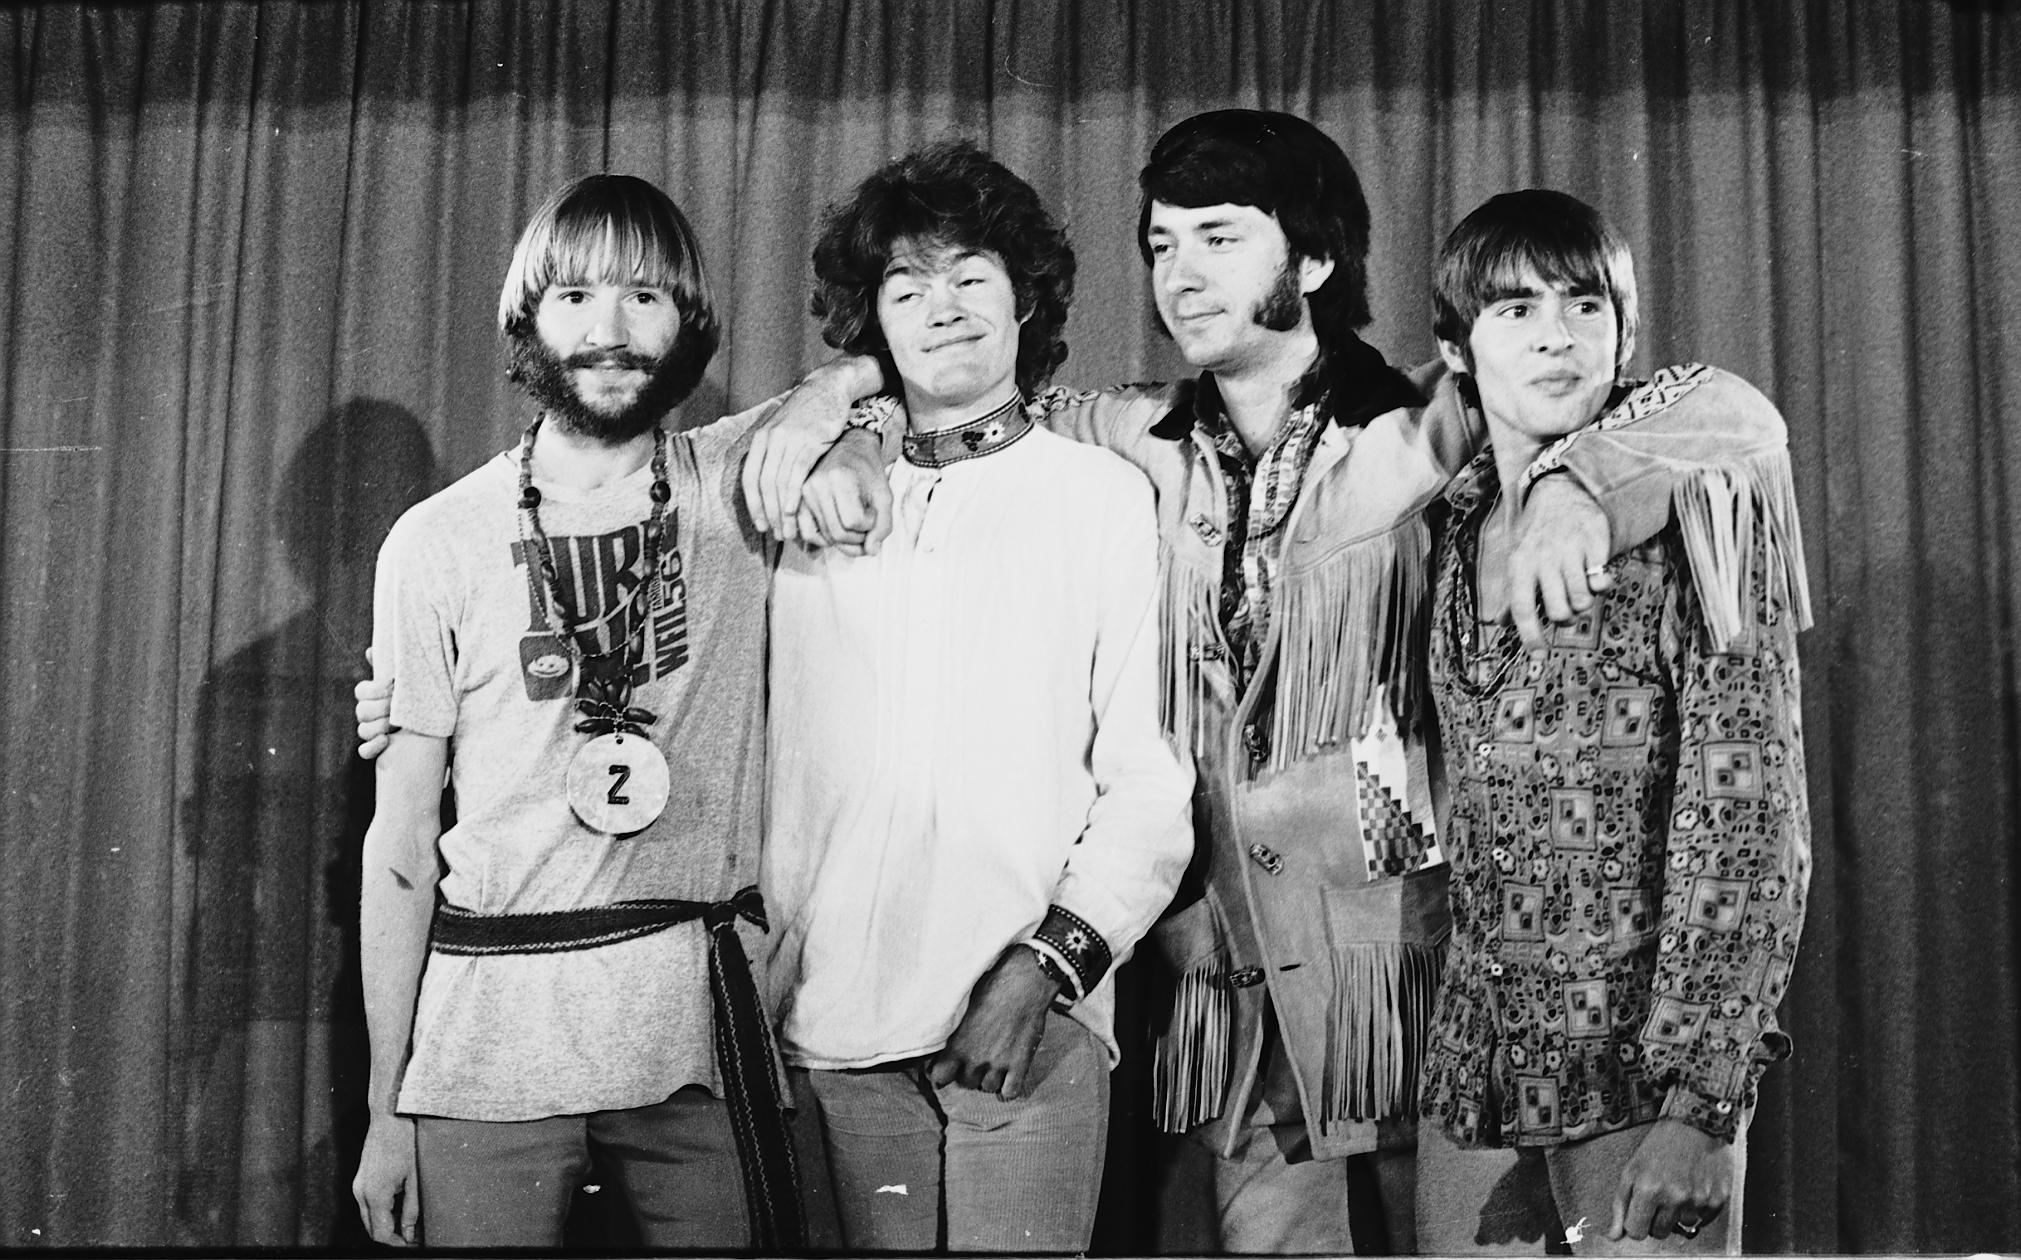 The Monkees' Peter Tork, Micky Dolenz, Mike Nesmith, and Davy Jones in front of a curtain